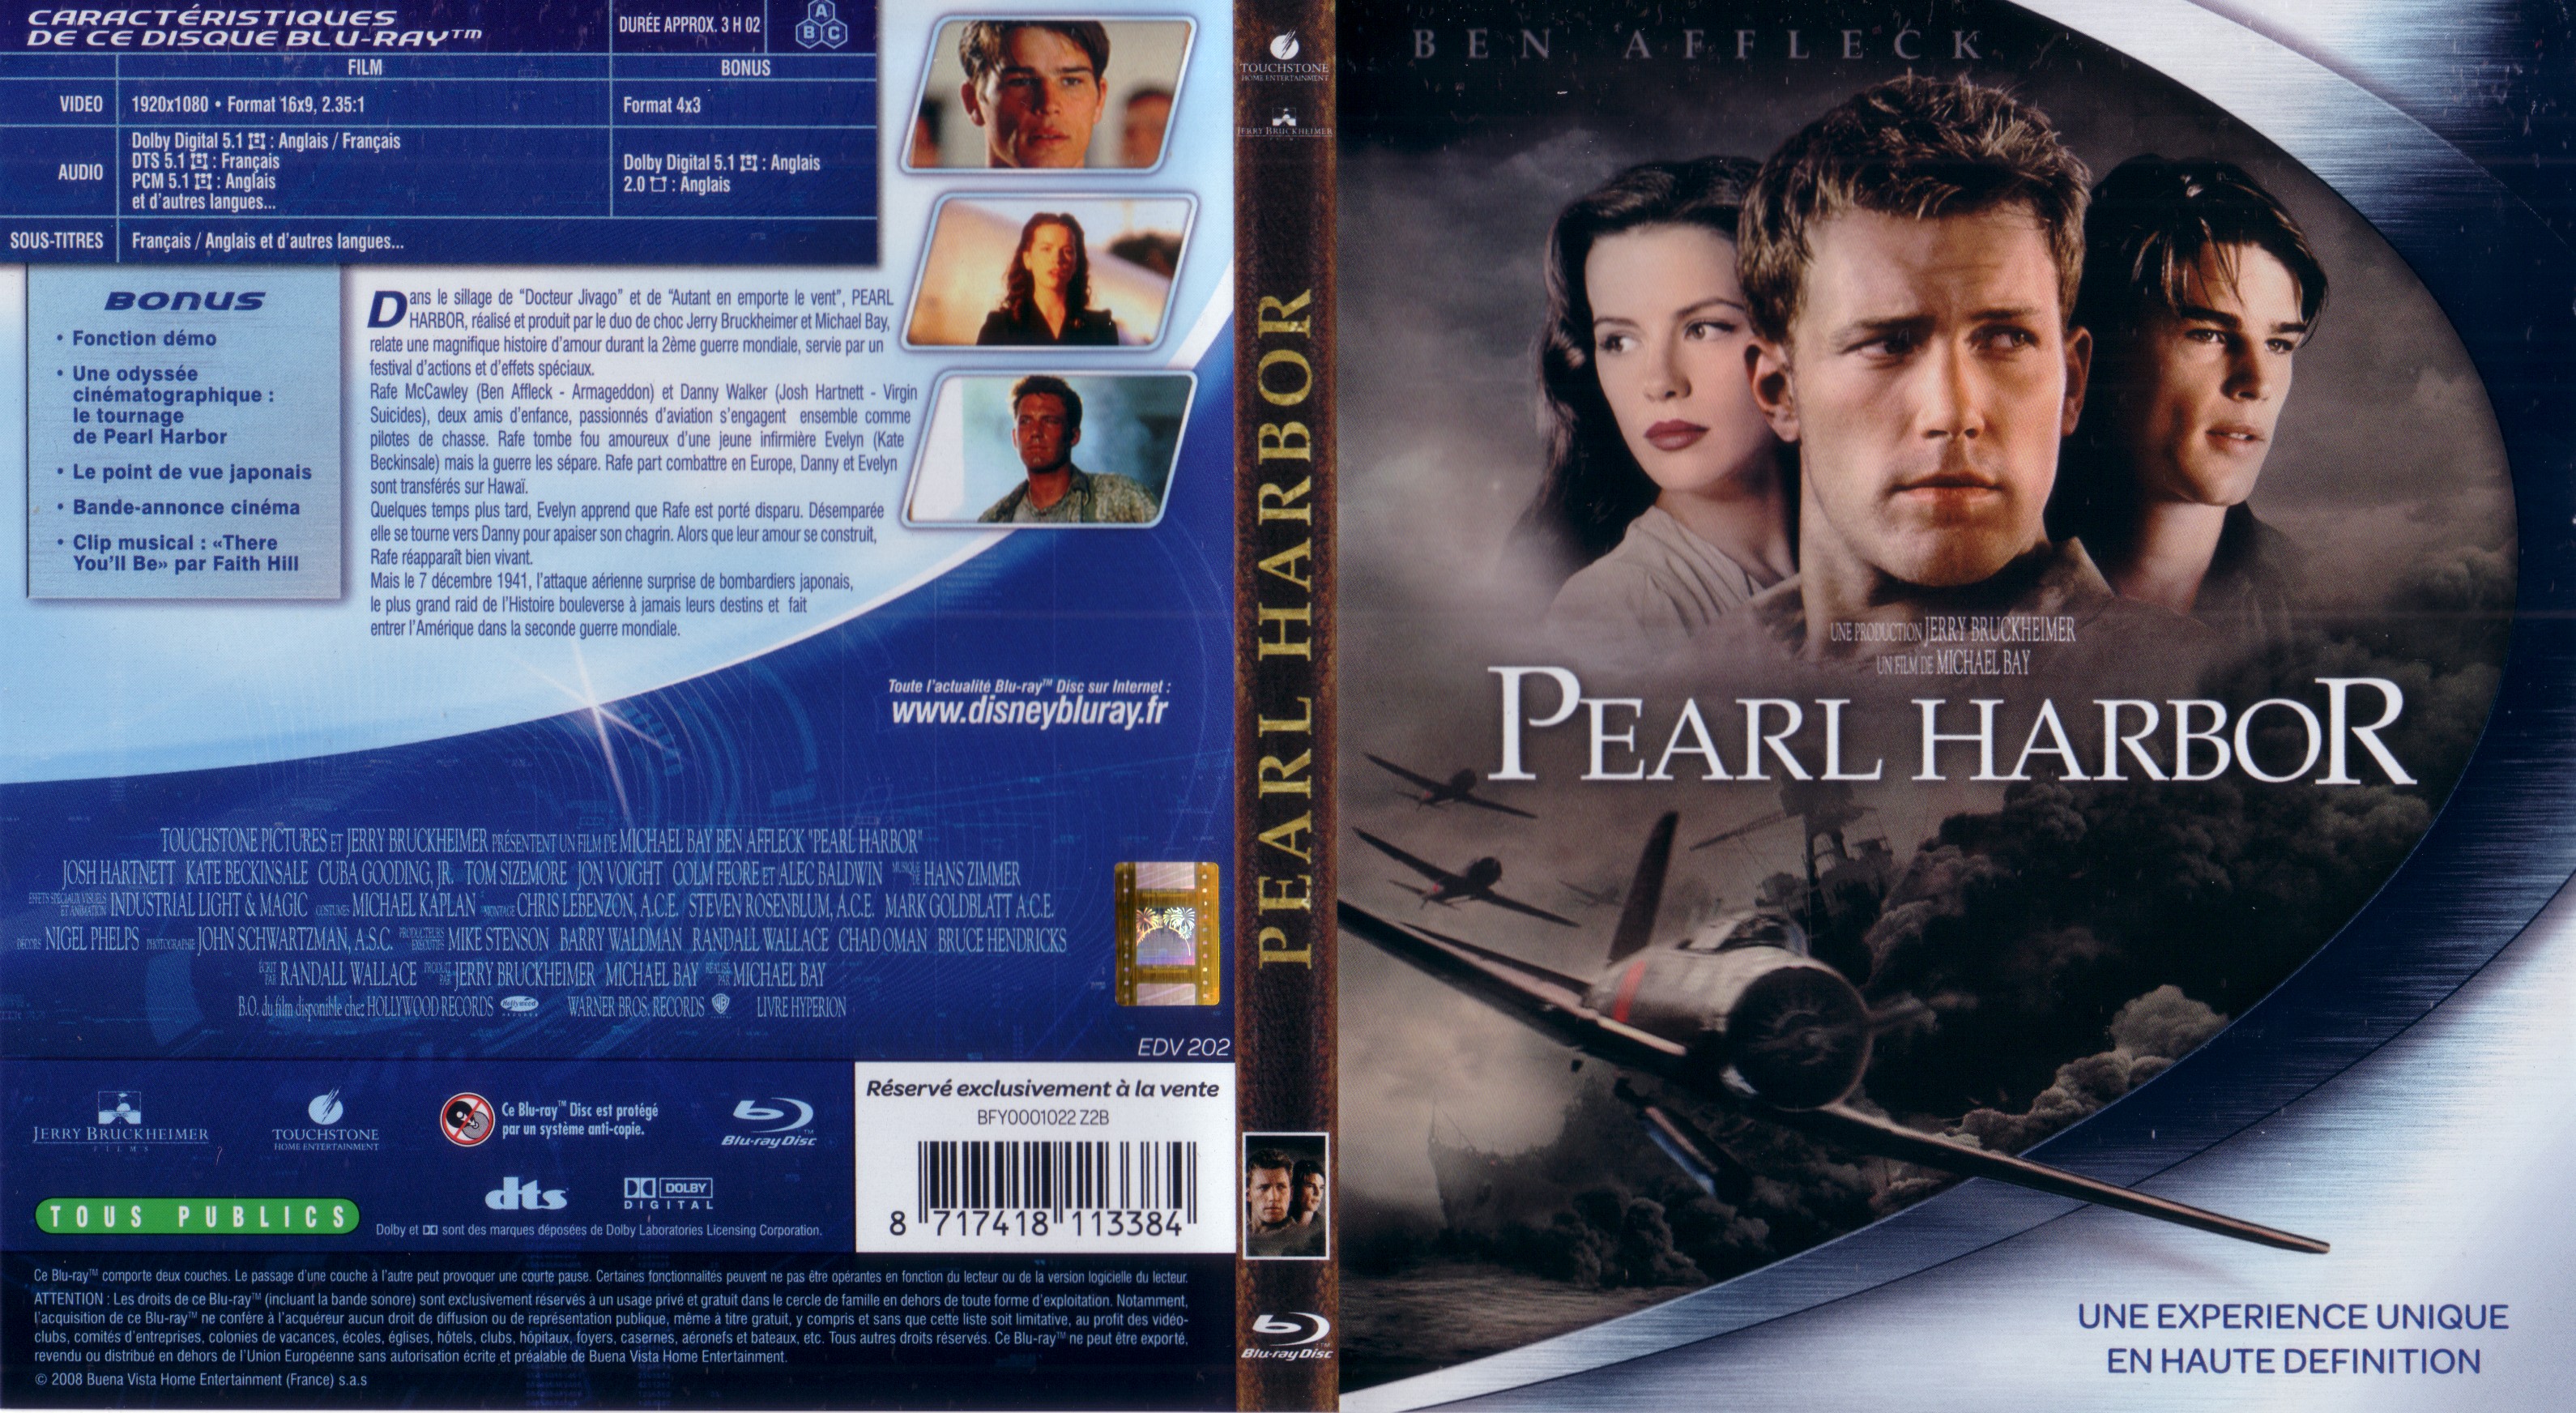 Jaquette DVD Pearl harbor (BLU-RAY)